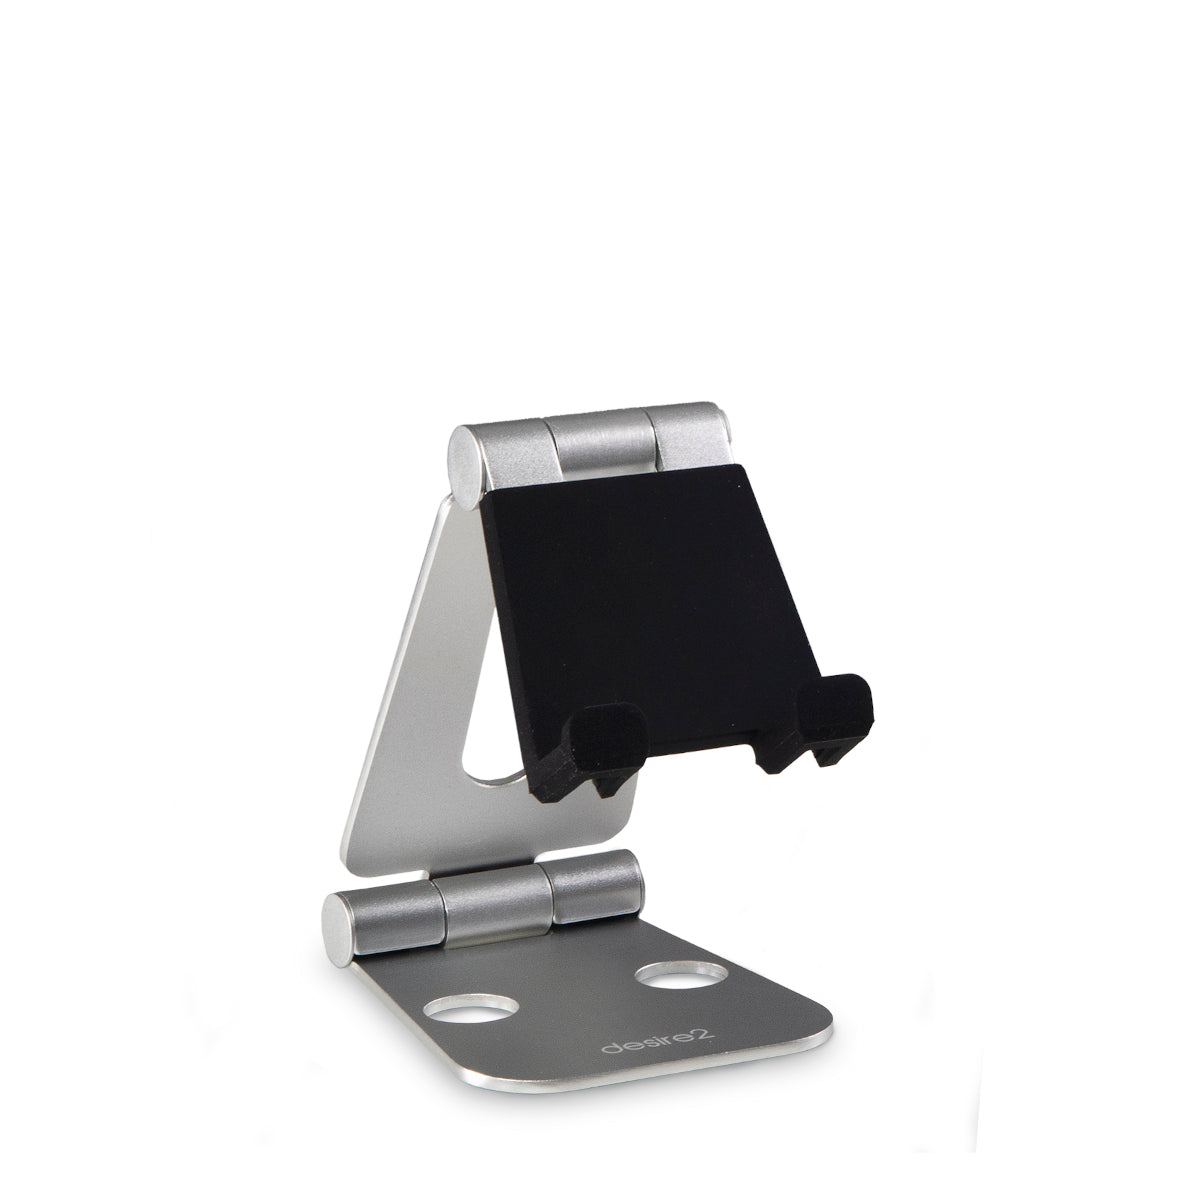 Silver Aluminum desk stand for Tablet and Smartphone with adjustable angles shown in the open position. The part the holds the device has soft black silicone covering it.